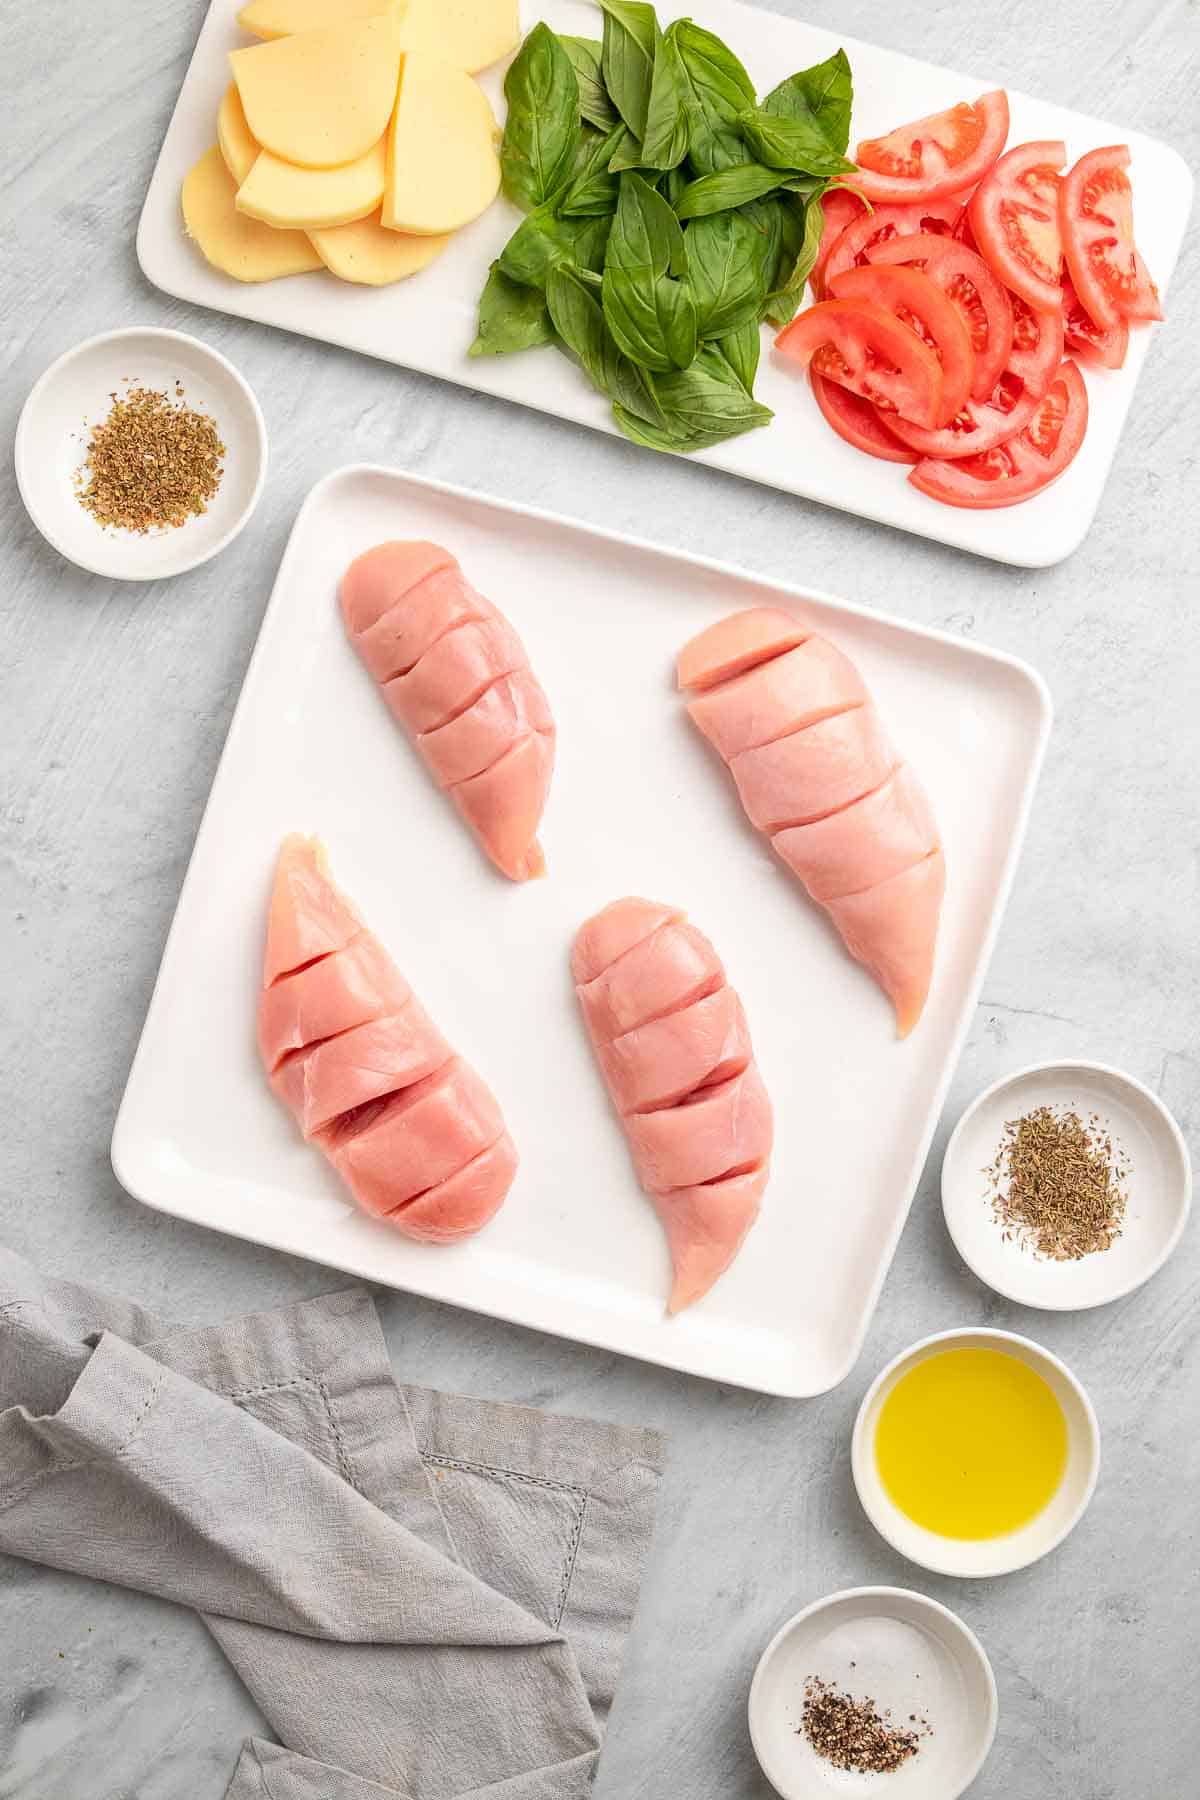 Four sliced chicken breasts on a white plate next to a white serving tray and four ramekins with the rest of the ingredients